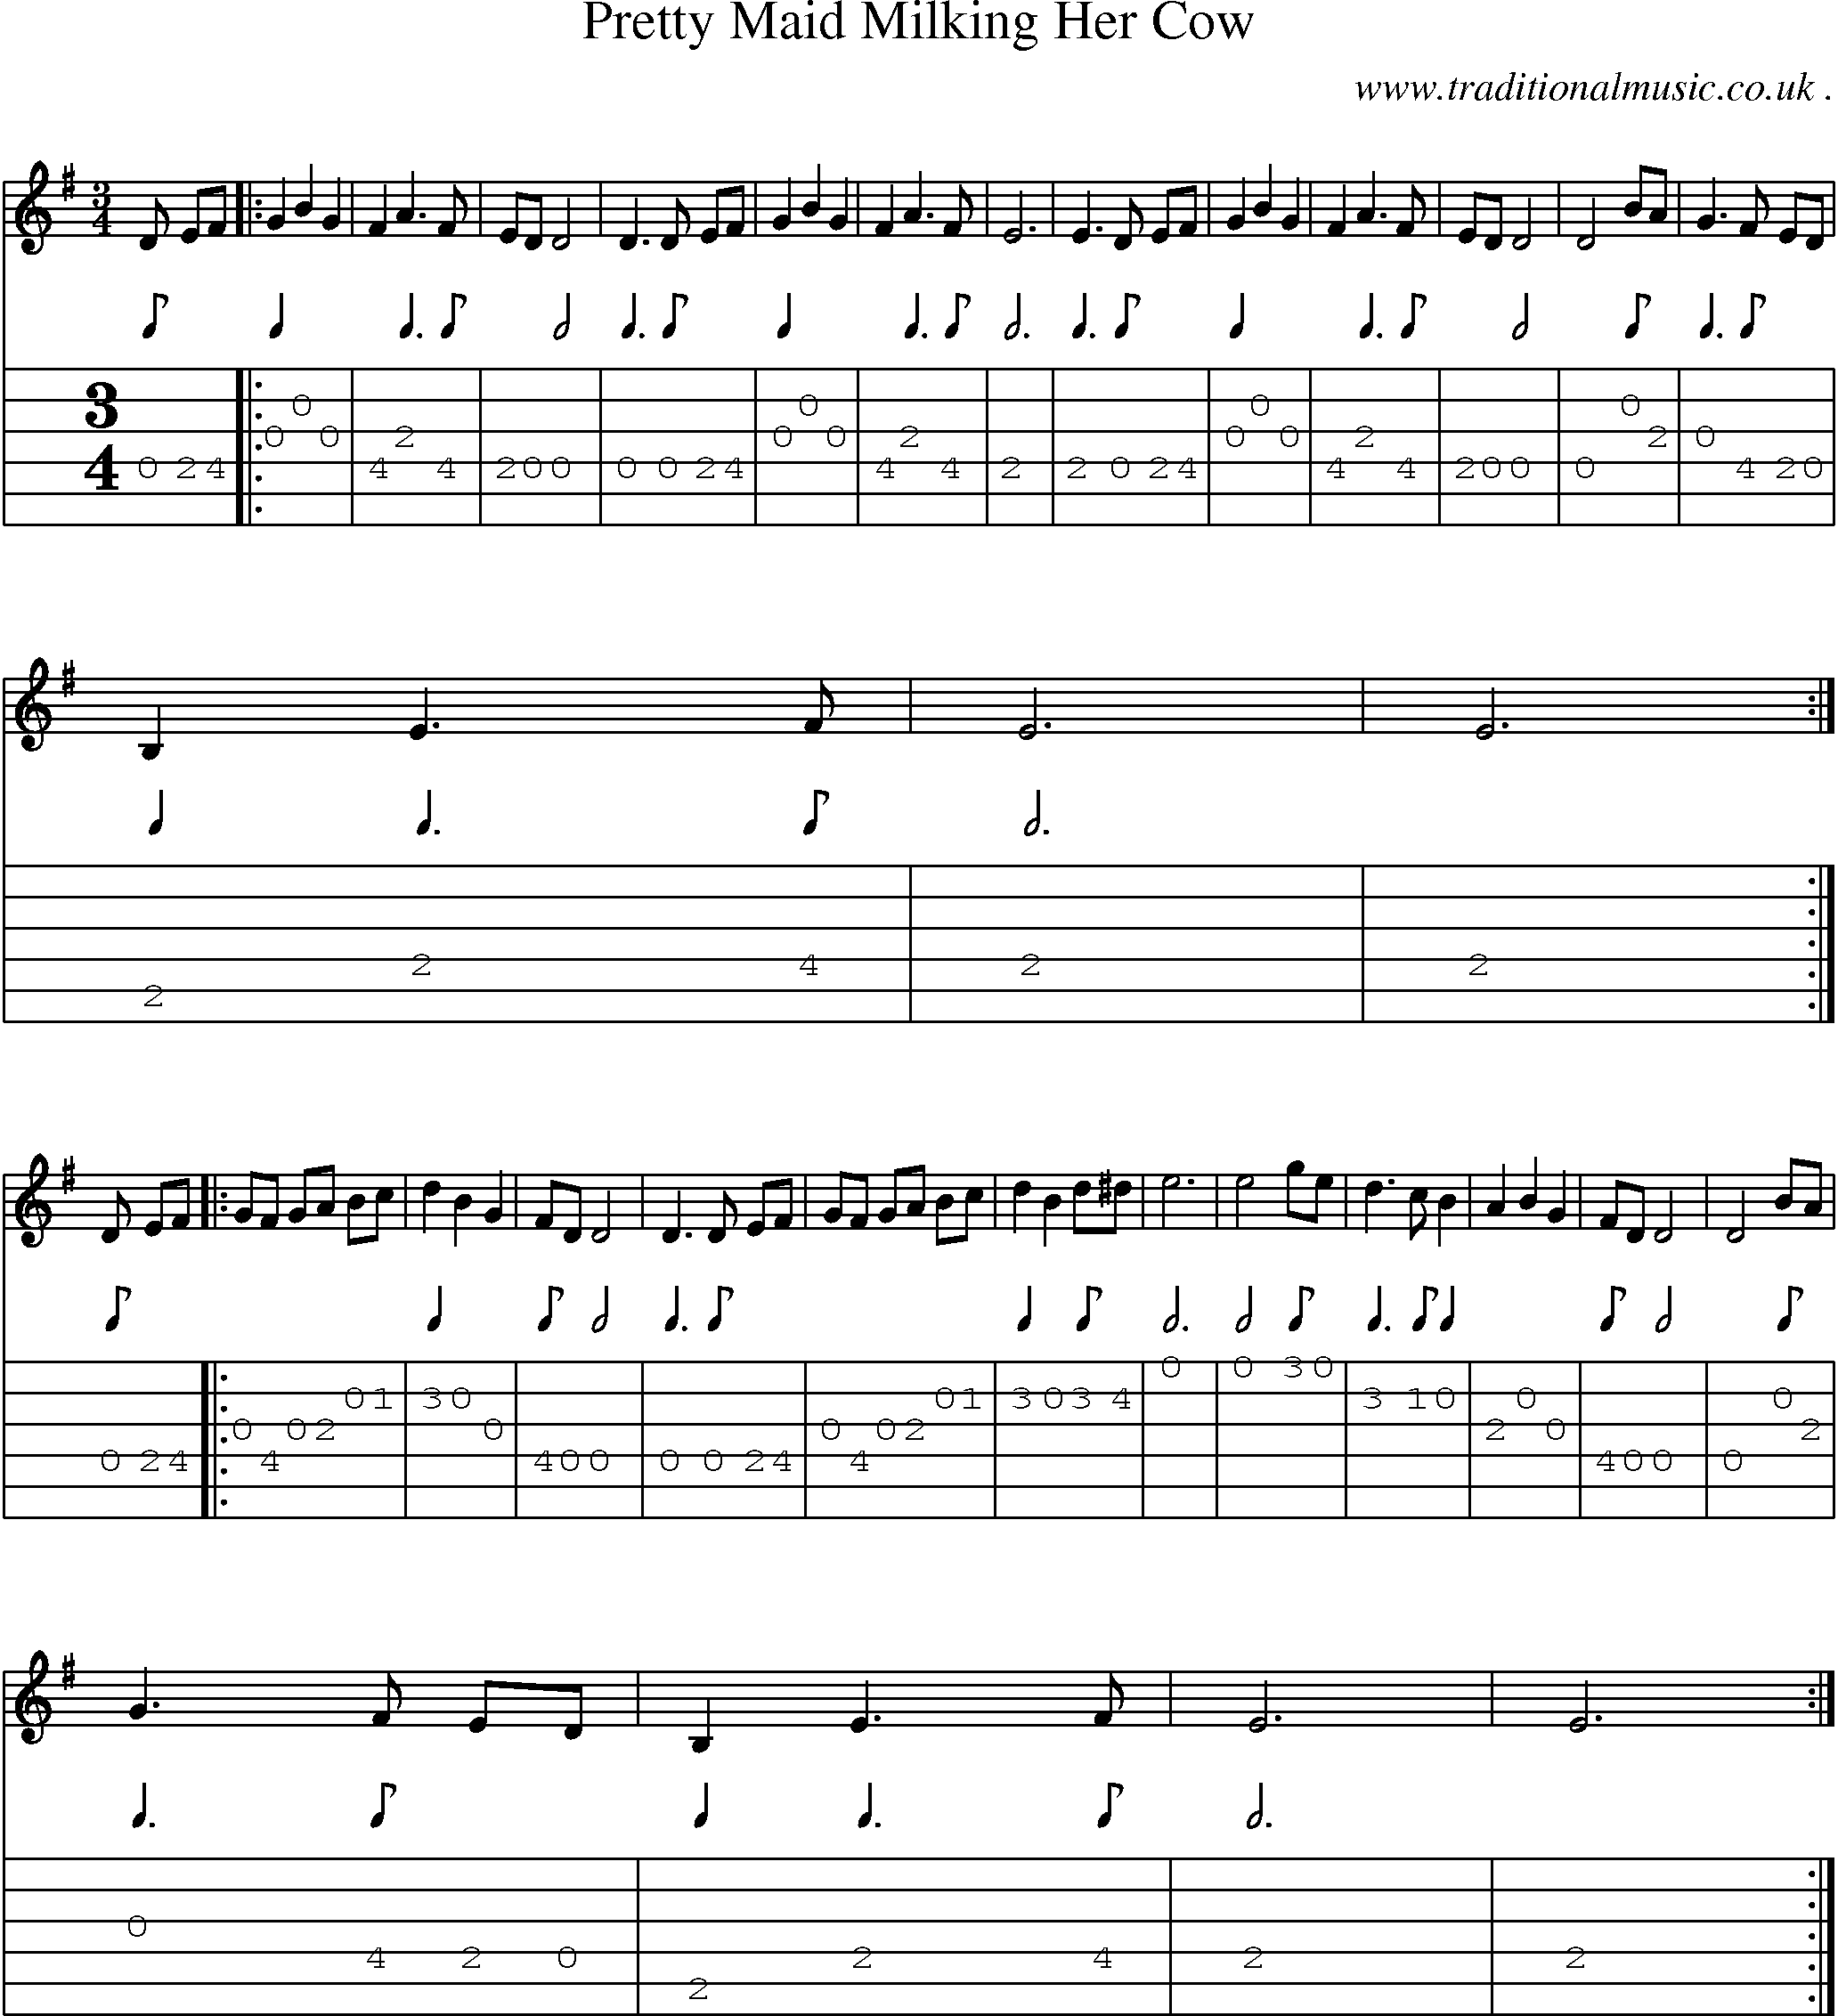 Sheet-Music and Guitar Tabs for Pretty Maid Milking Her Cow